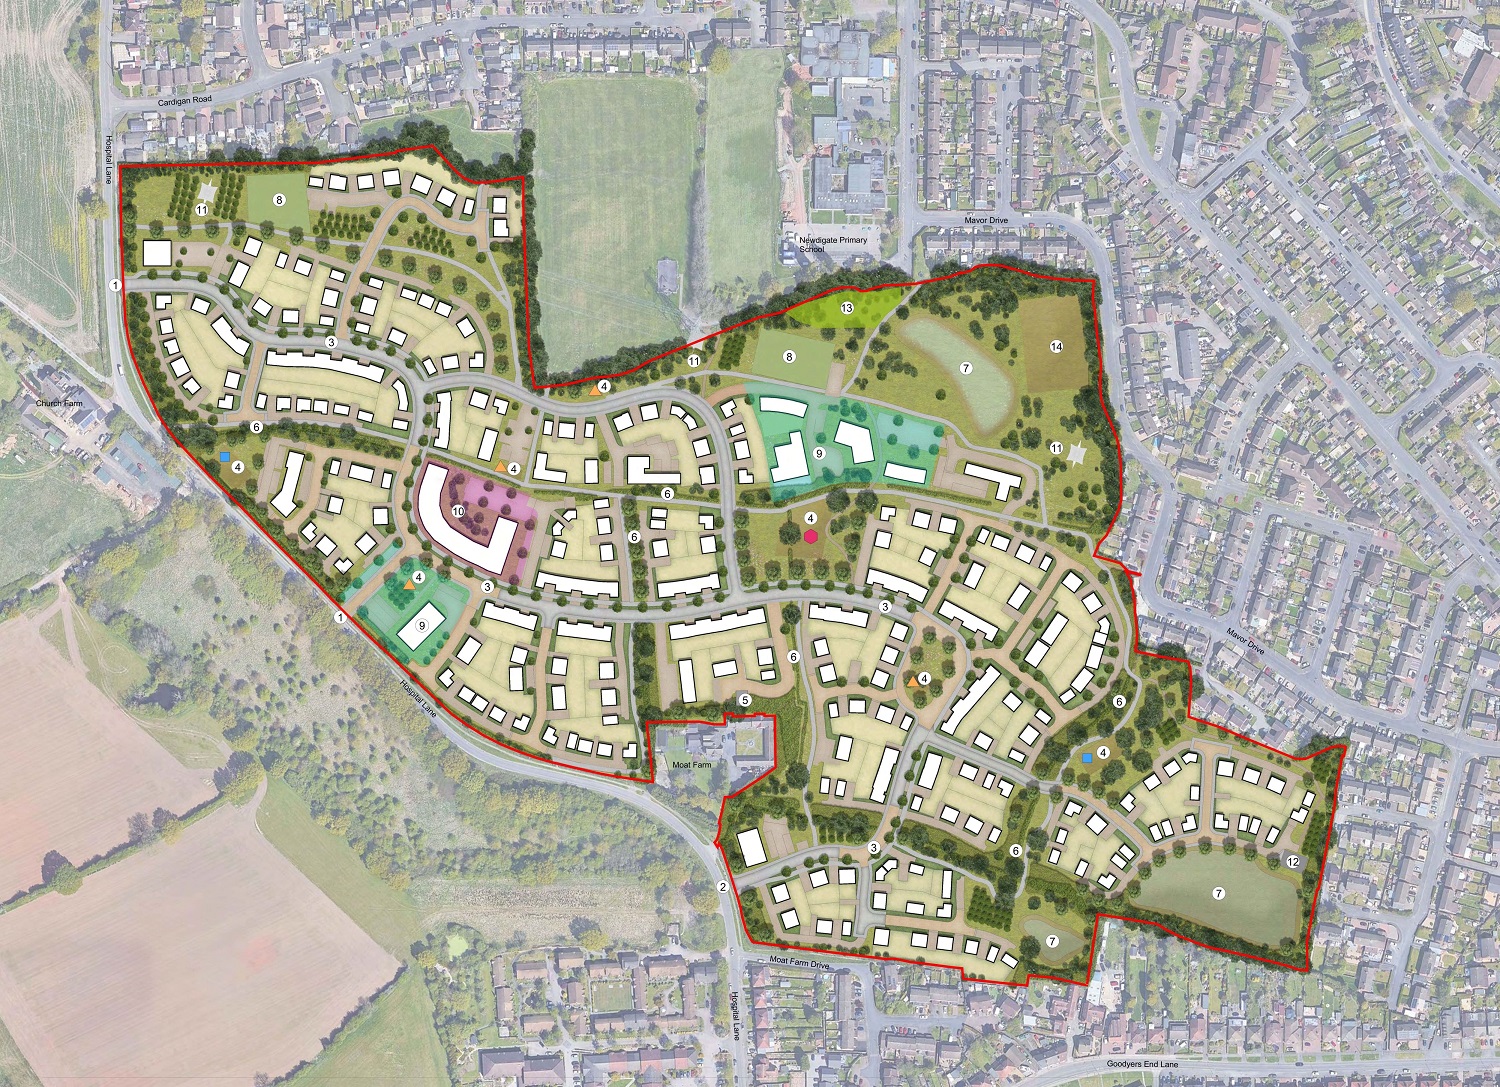 455-home development in Bedworth given green light